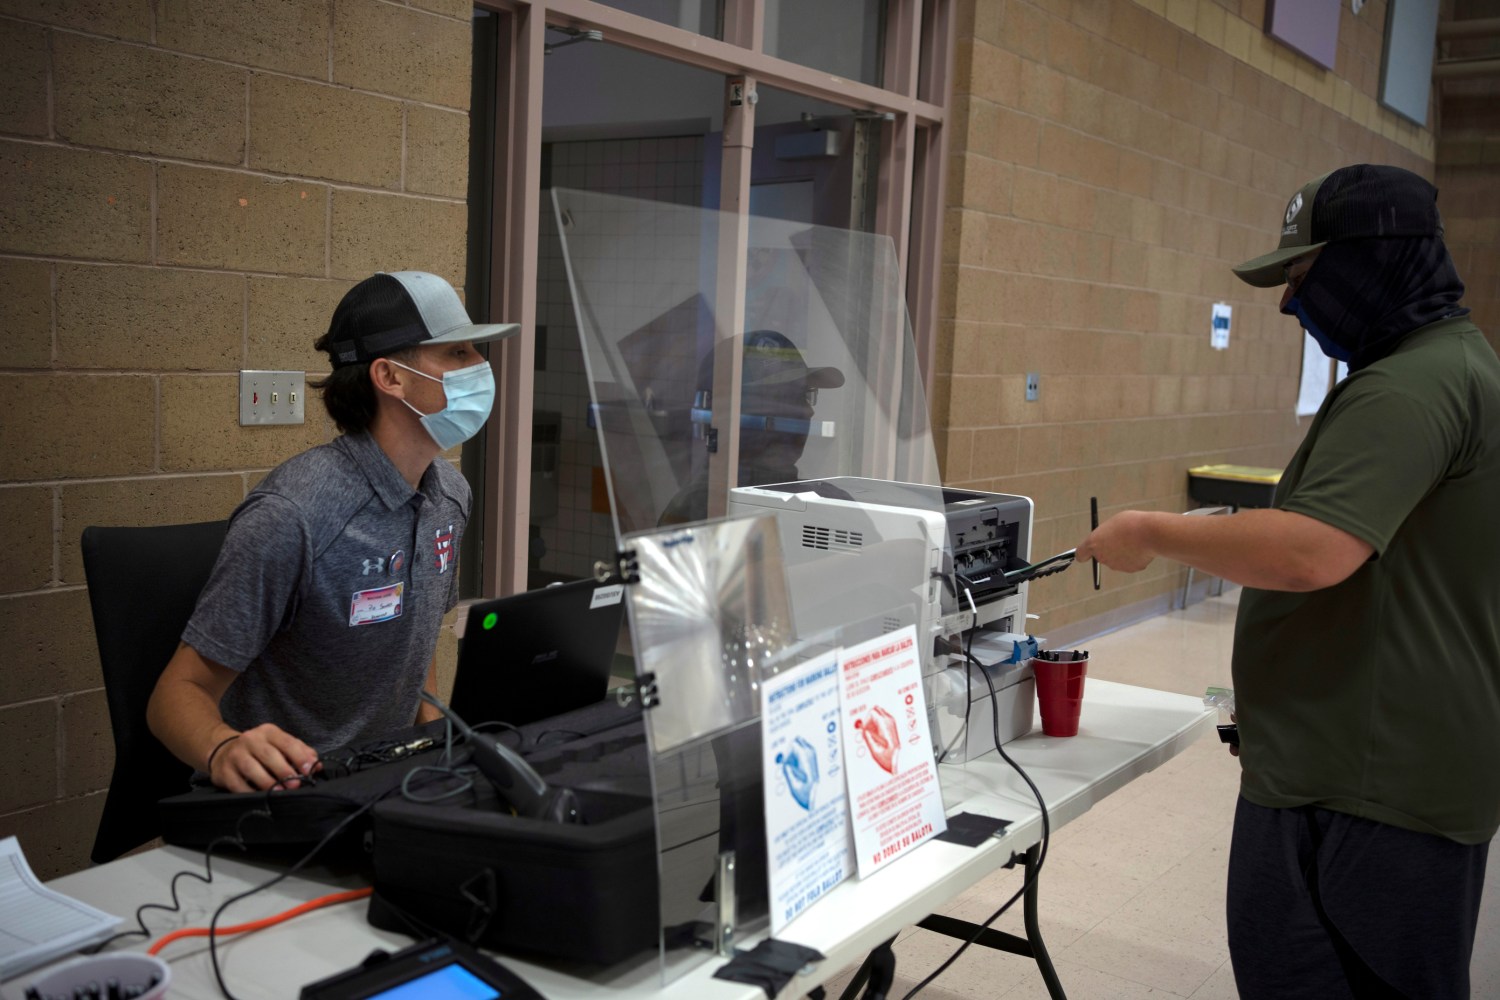 Caleb Kirkland, (R) gets his ballot from machine judge Pio Sancez during the primary election at Sonoma Elementary School in Las Cruces, New Mexico, U.S., June 2, 2020. REUTERS/Paul Ratje